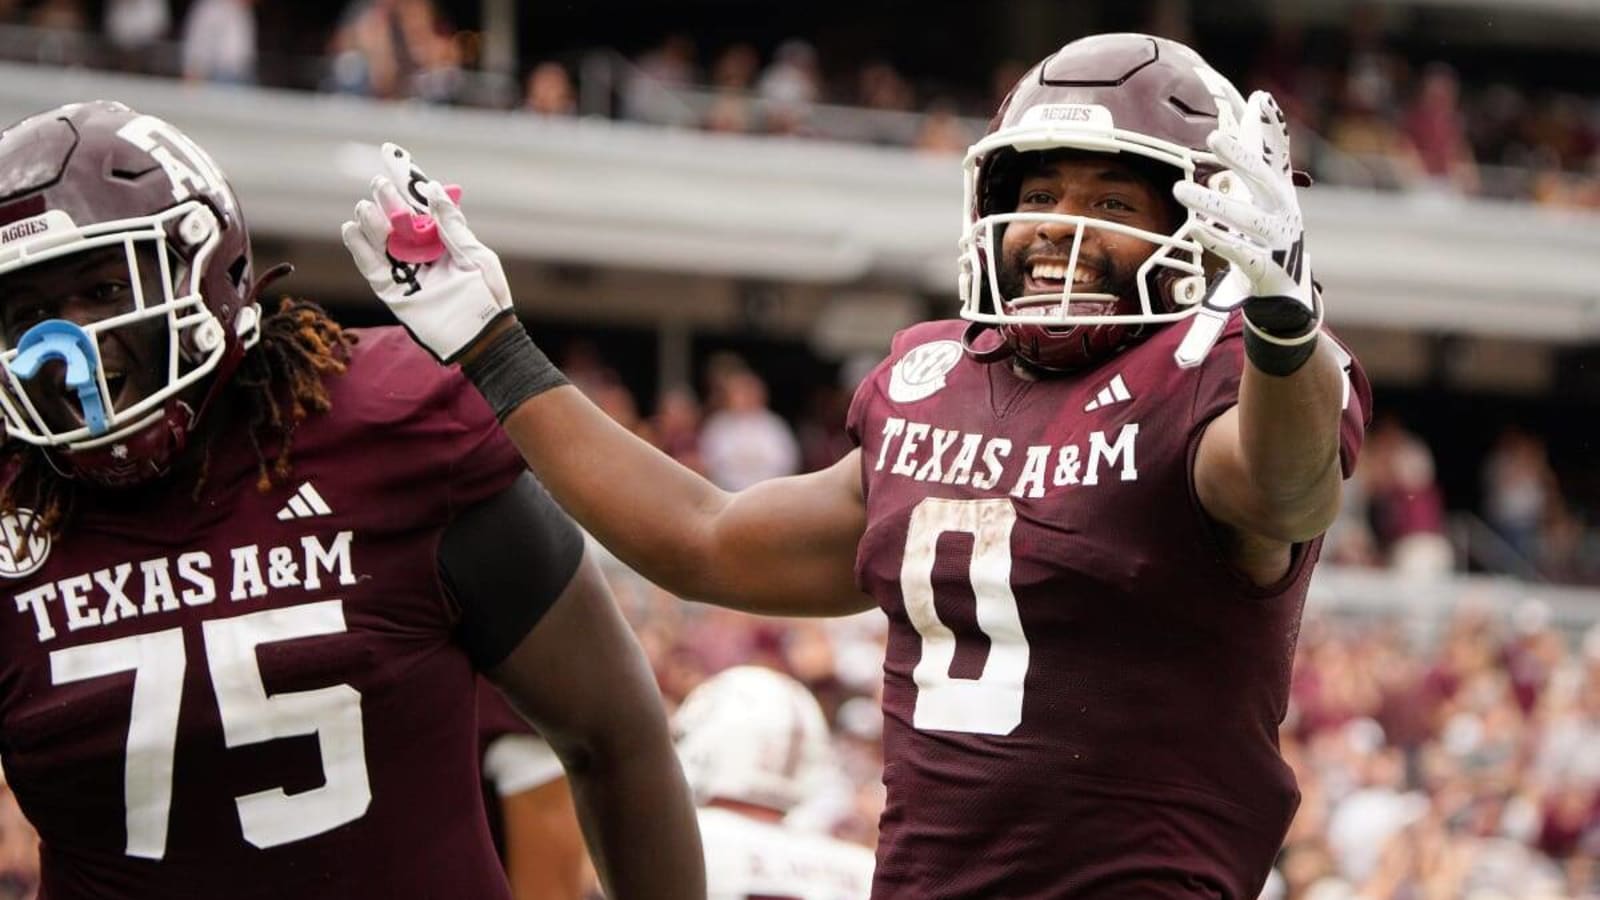 Senior Aggies Reminisce On Time At Kyle Field In Win Over ACU